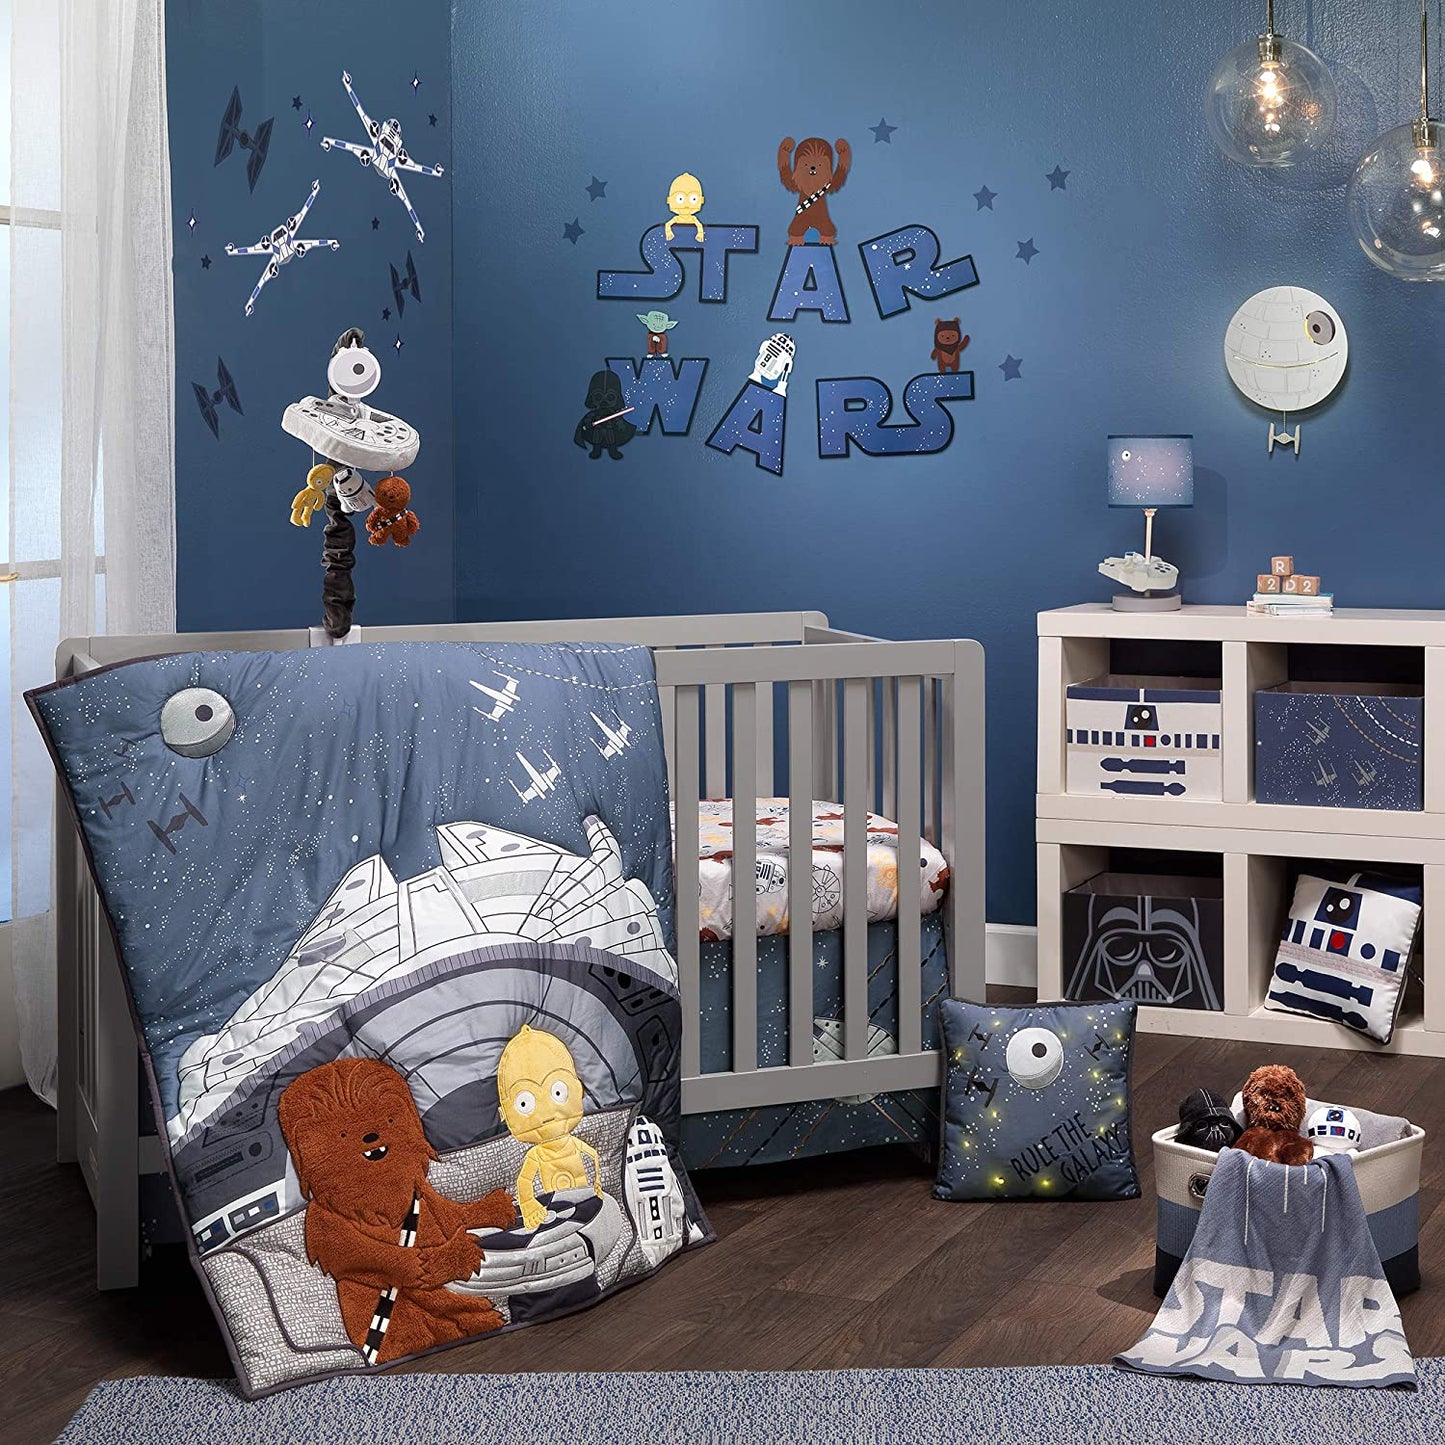 A baby child's Star Wars themed bedroom which has a Star Wars mobile hanging over the crib. On the wall are the words, "Star Wars" and there is other Star Wars themed items scattered about the room.